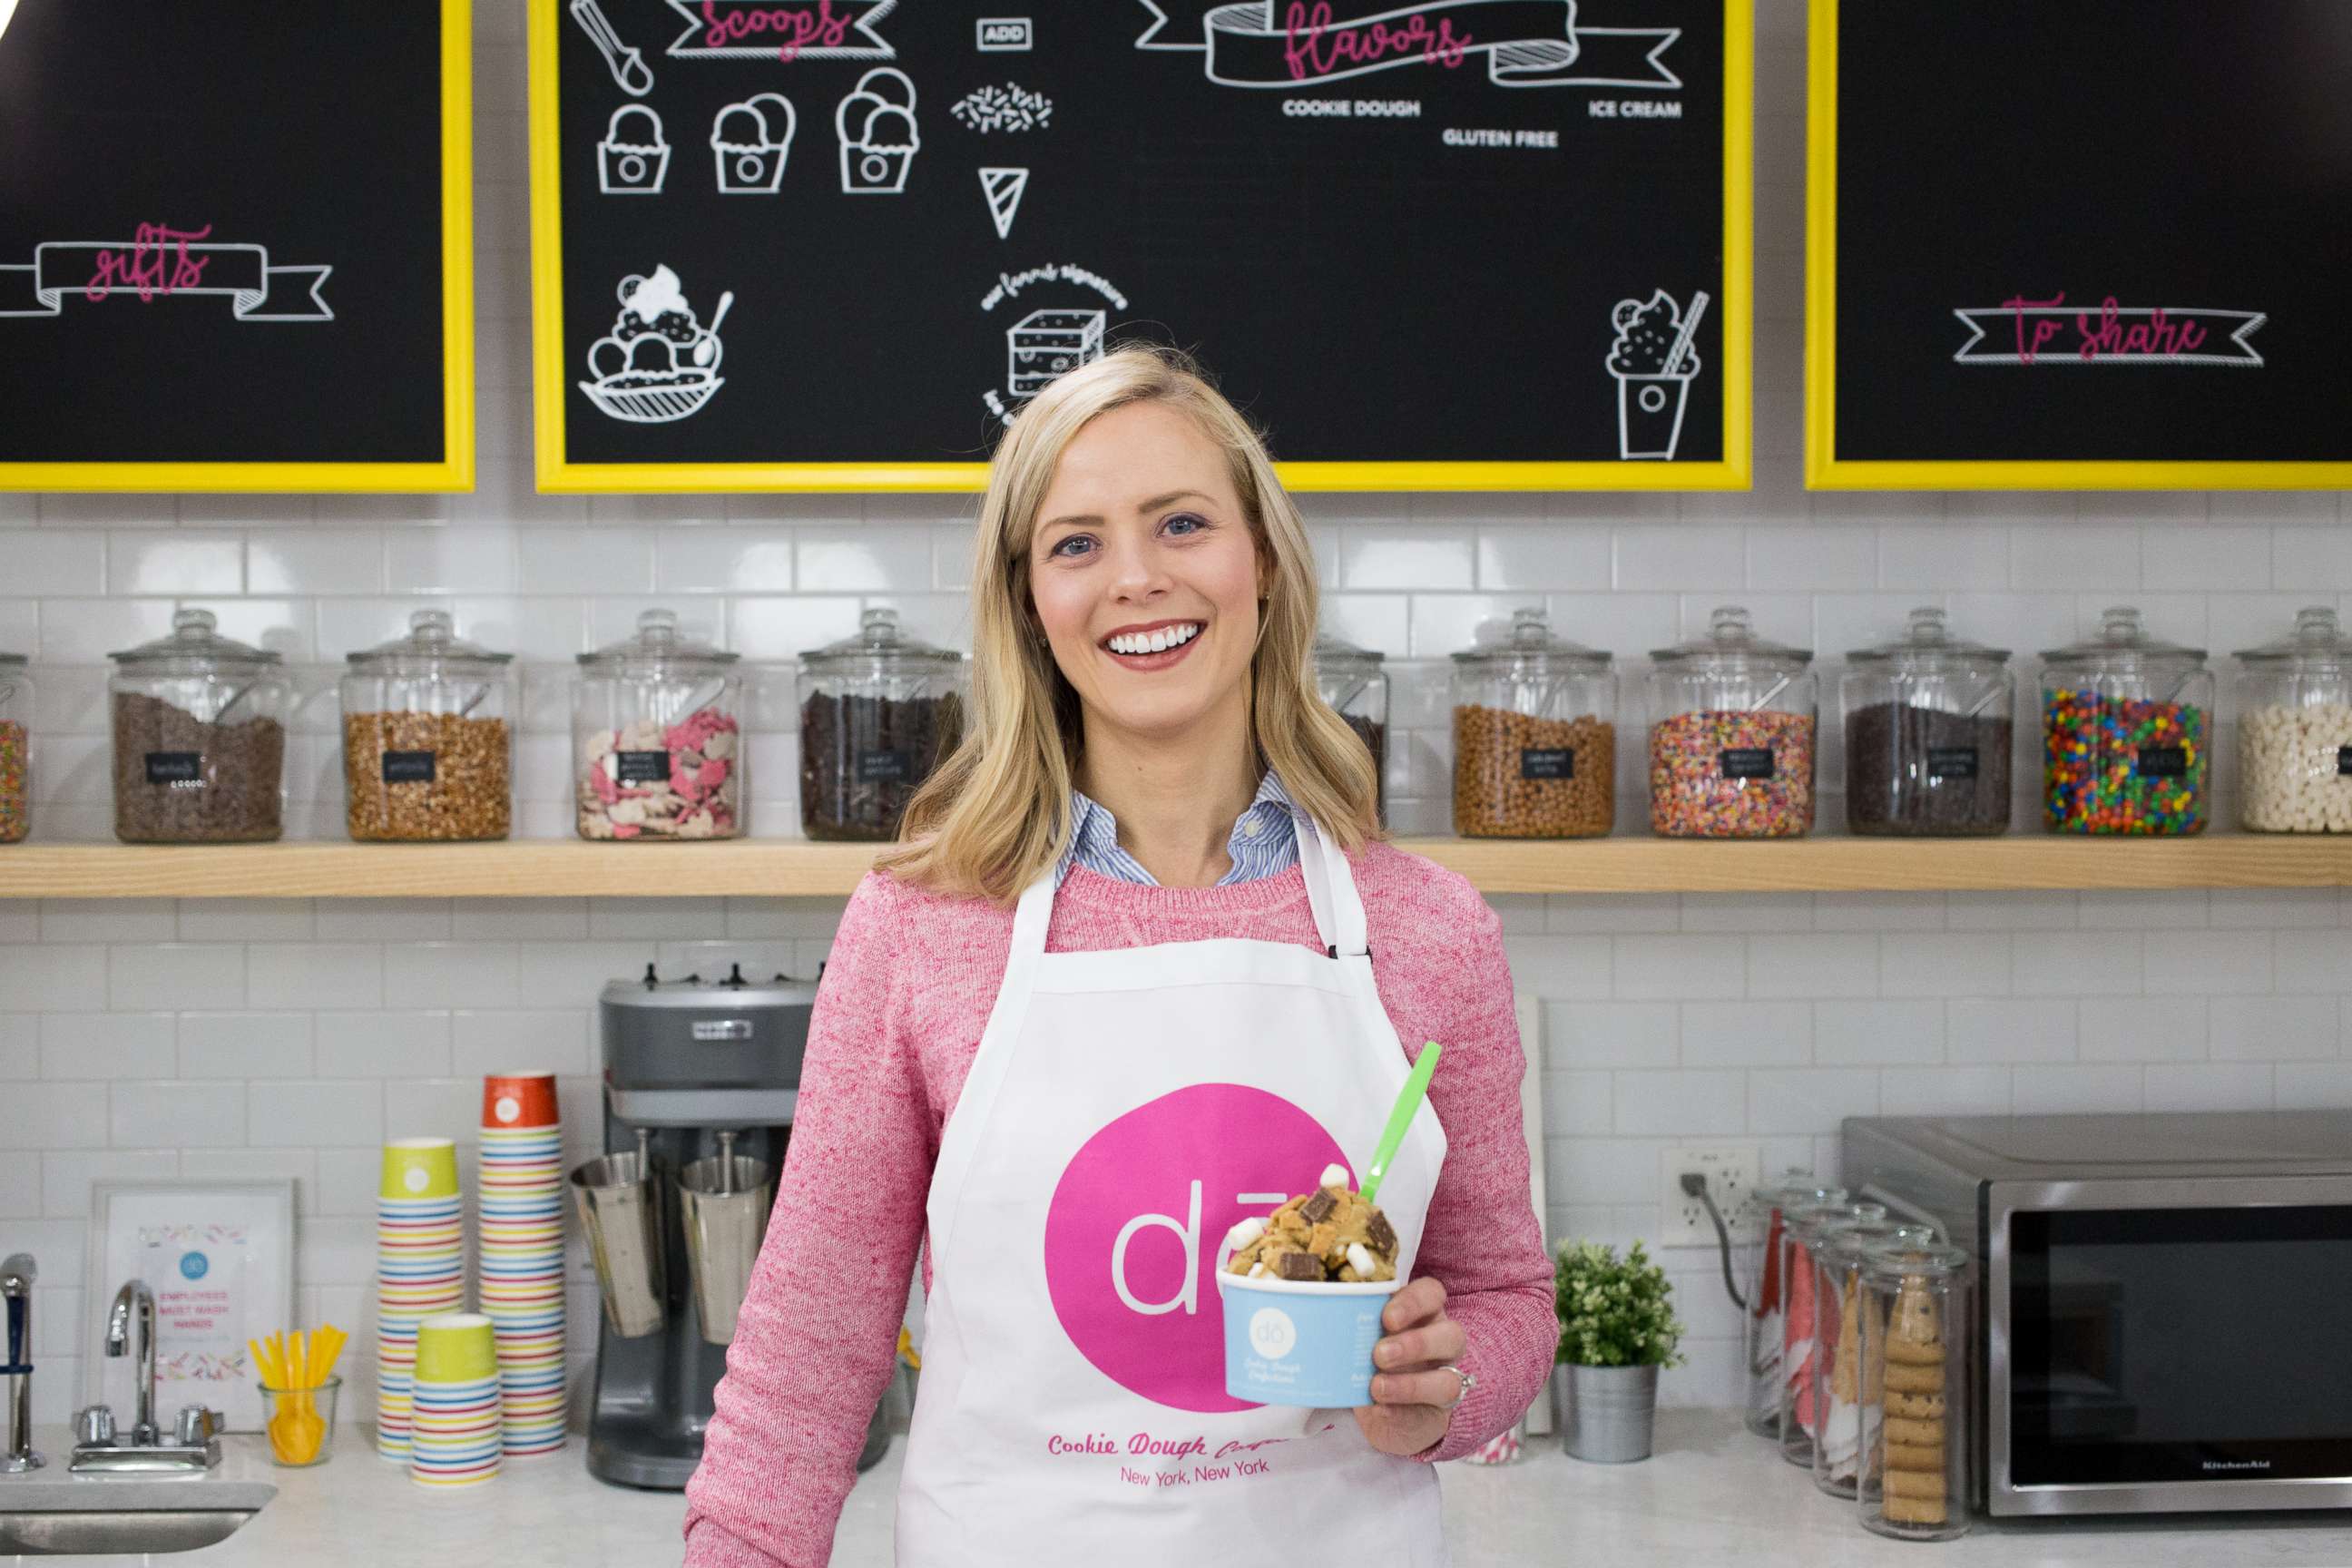 PHOTO: Kristen Tomlan is the founder of DO, a NYC bakery specializing in Instagram-worthy cookie dough treats.